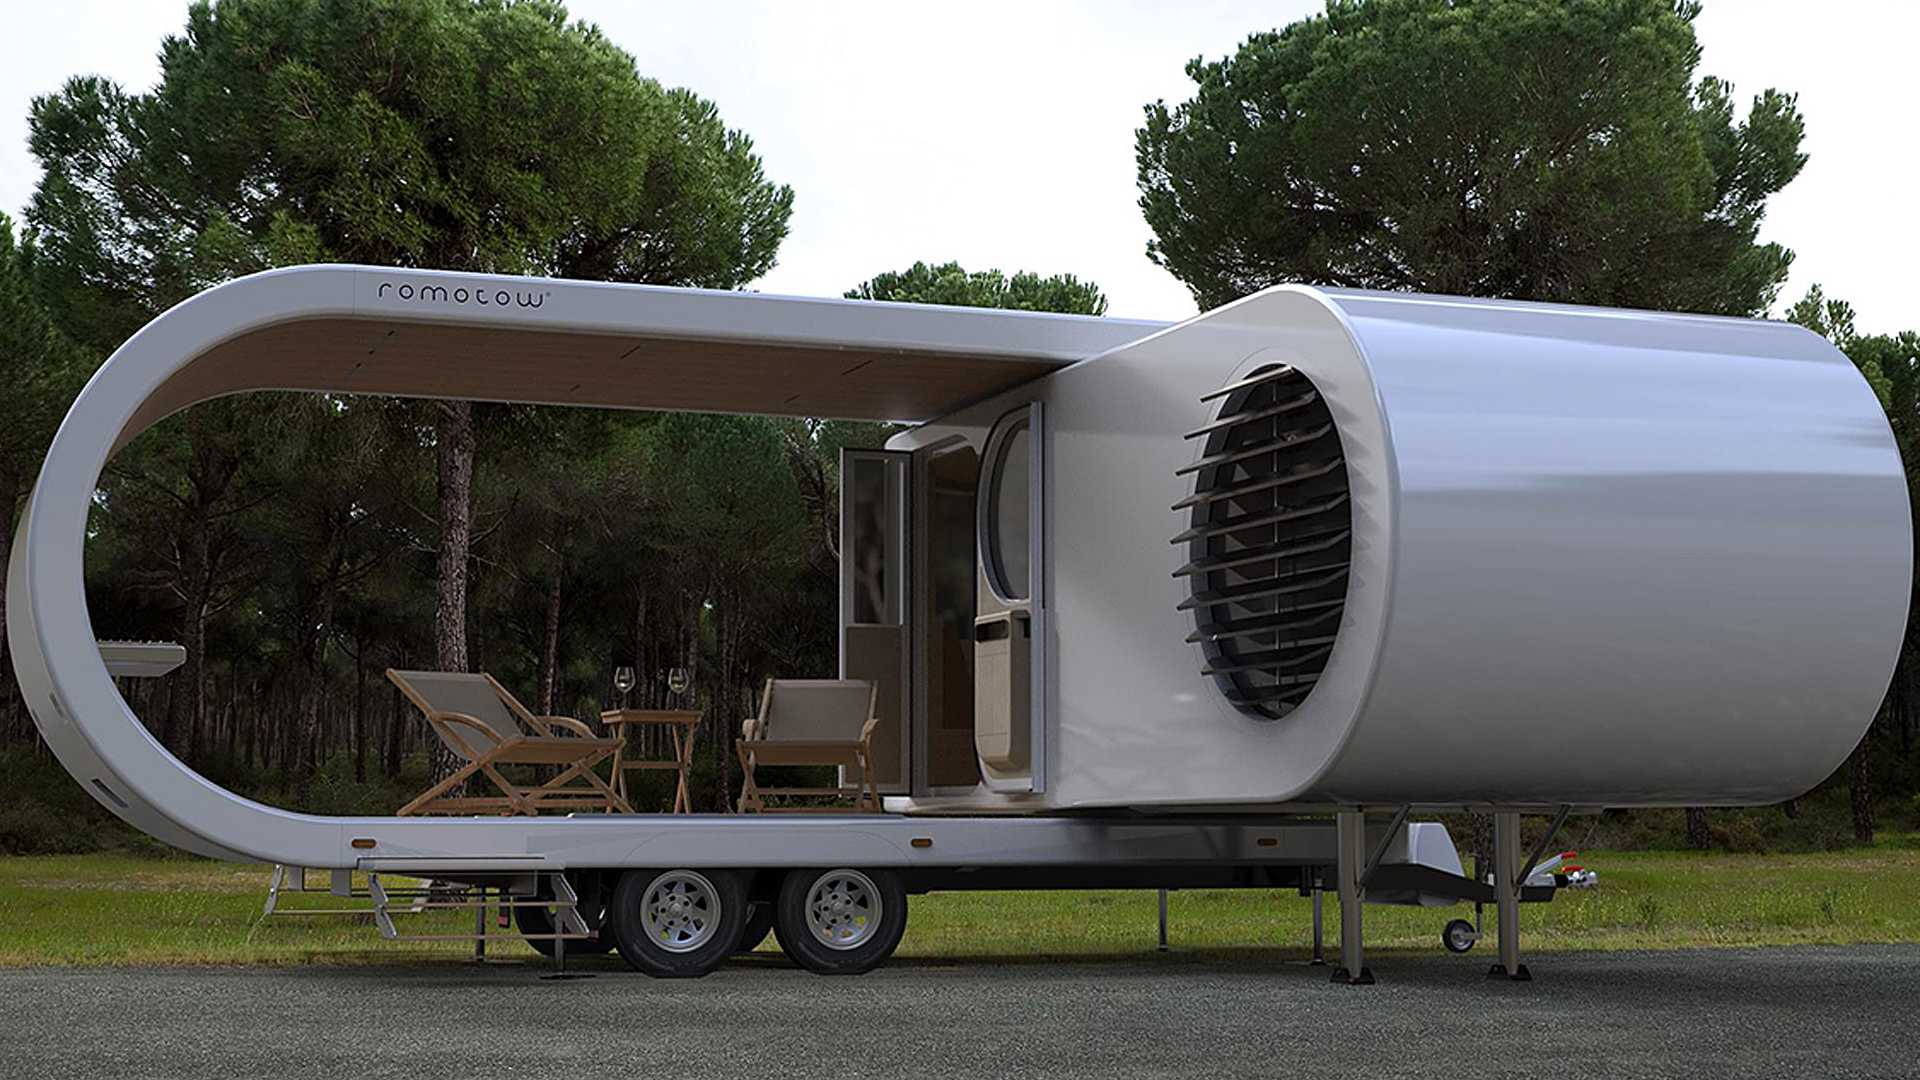 https://s1.cdn.autoevolution.com/images/news/gallery/romotow-trailer-camper-has-in-built-patio-for-the-ultimate-chill-experience_1.jpg